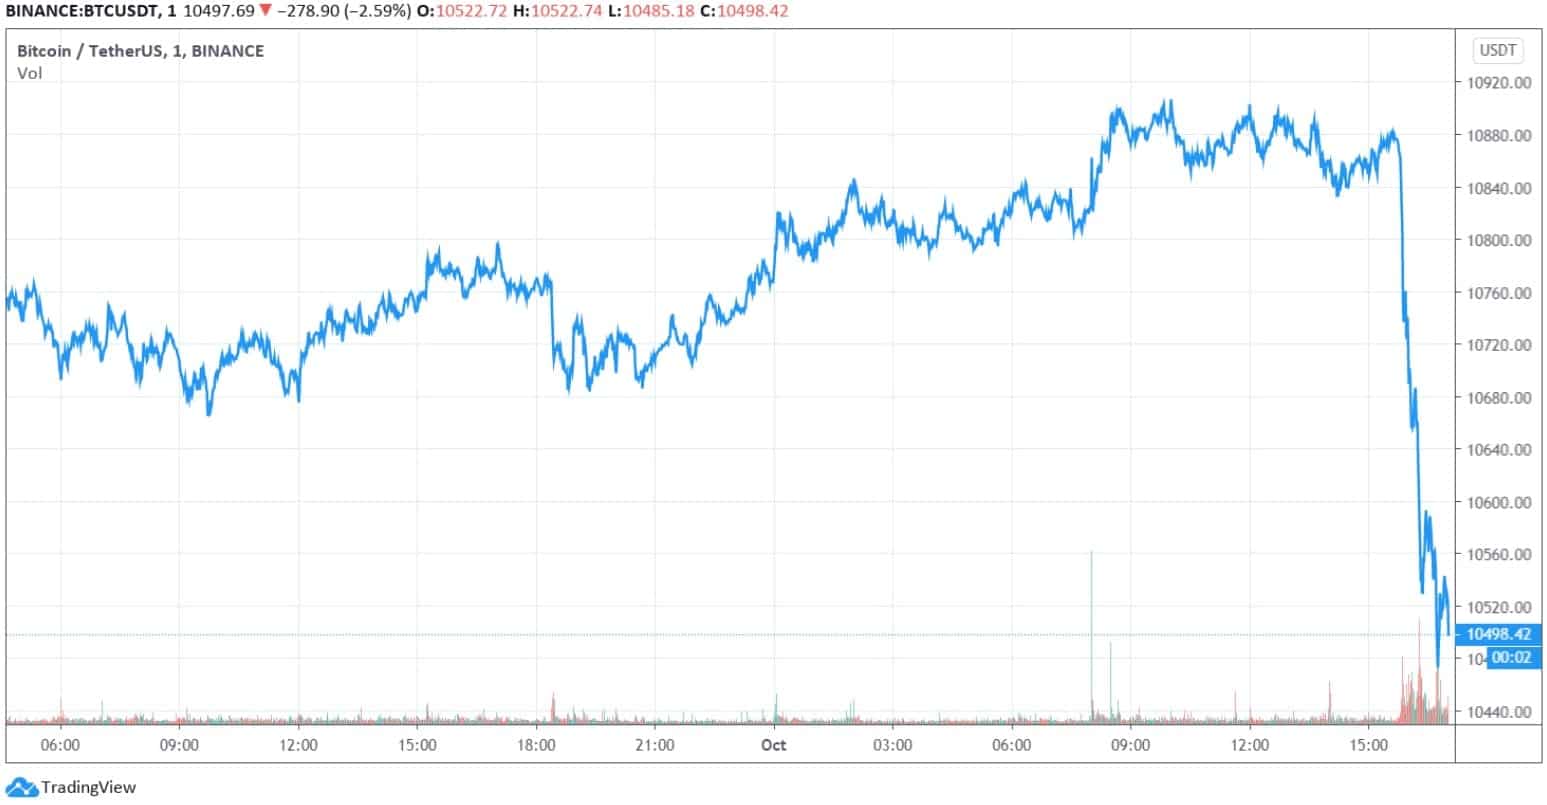 Bitcoin Tumbles $400 As CFTC Charges BitMEX Owners with Illegally Operating a Crypto Exchange